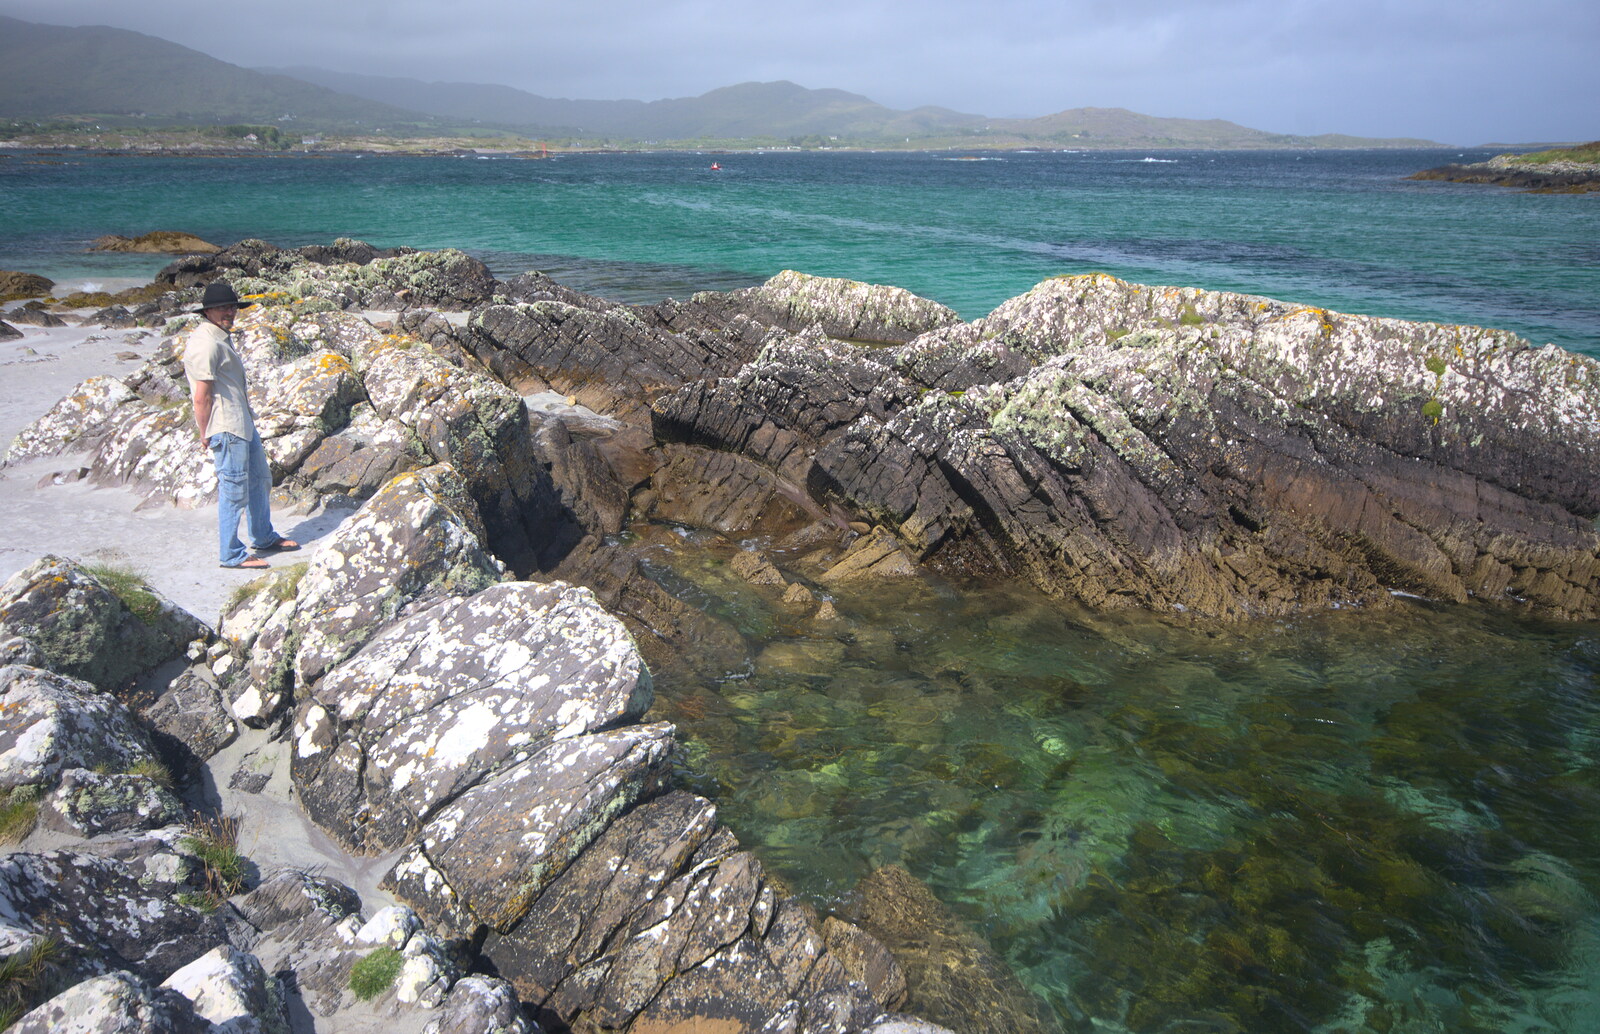 Philly regards the Caribbean-style waters from Staigue Fort and the Beach, Kerry, Ireland - 2nd August 2017